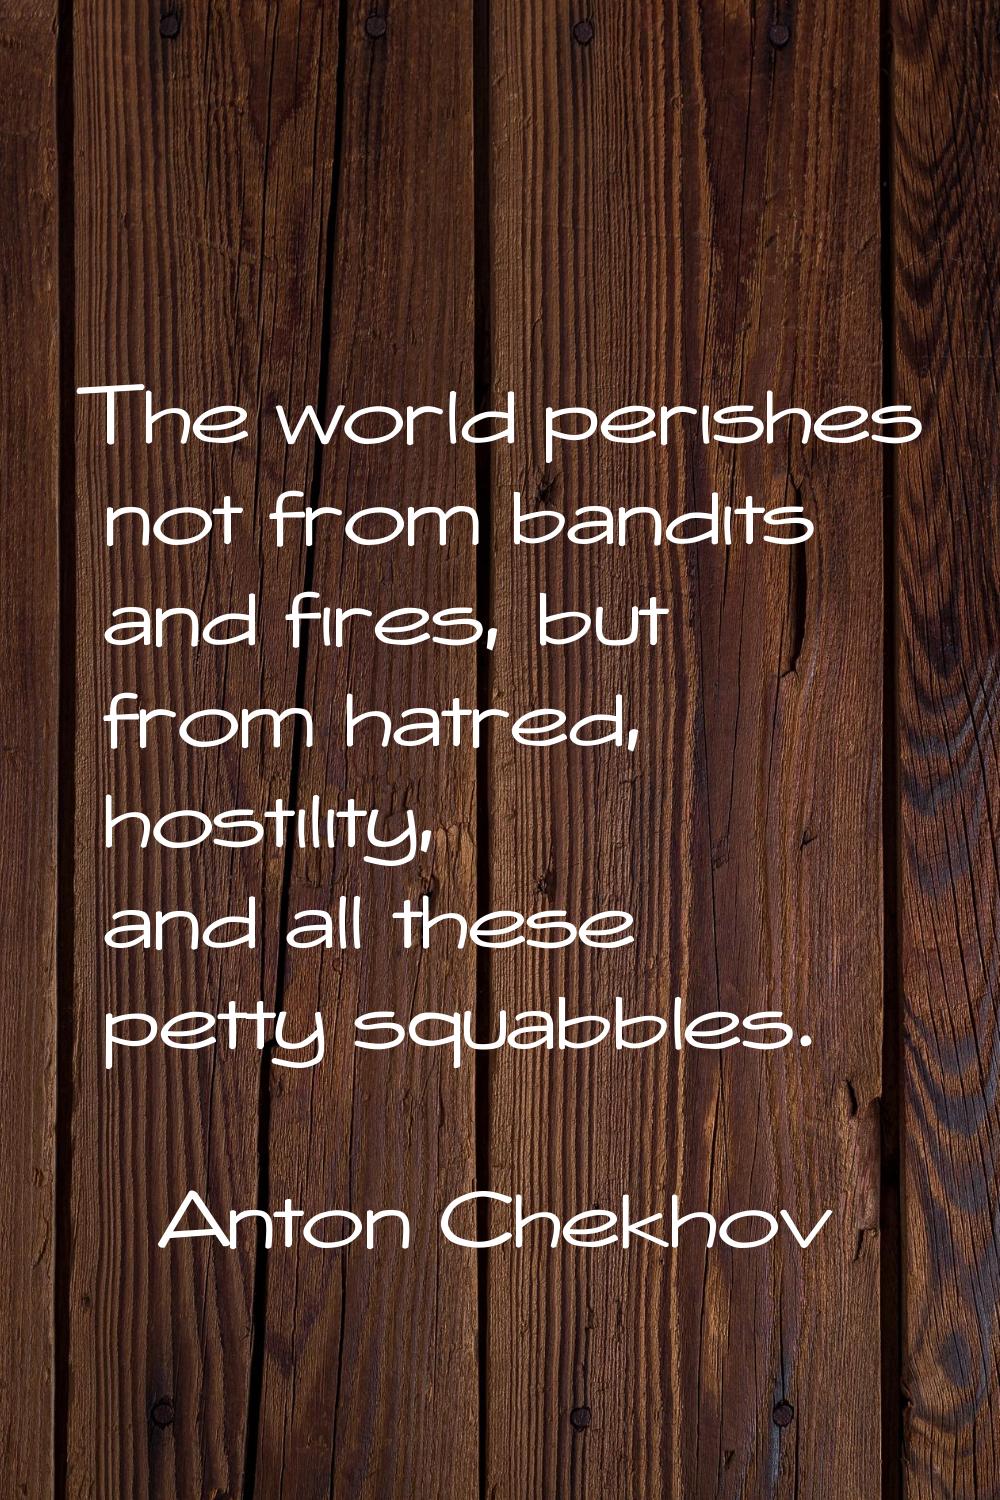 The world perishes not from bandits and fires, but from hatred, hostility, and all these petty squa